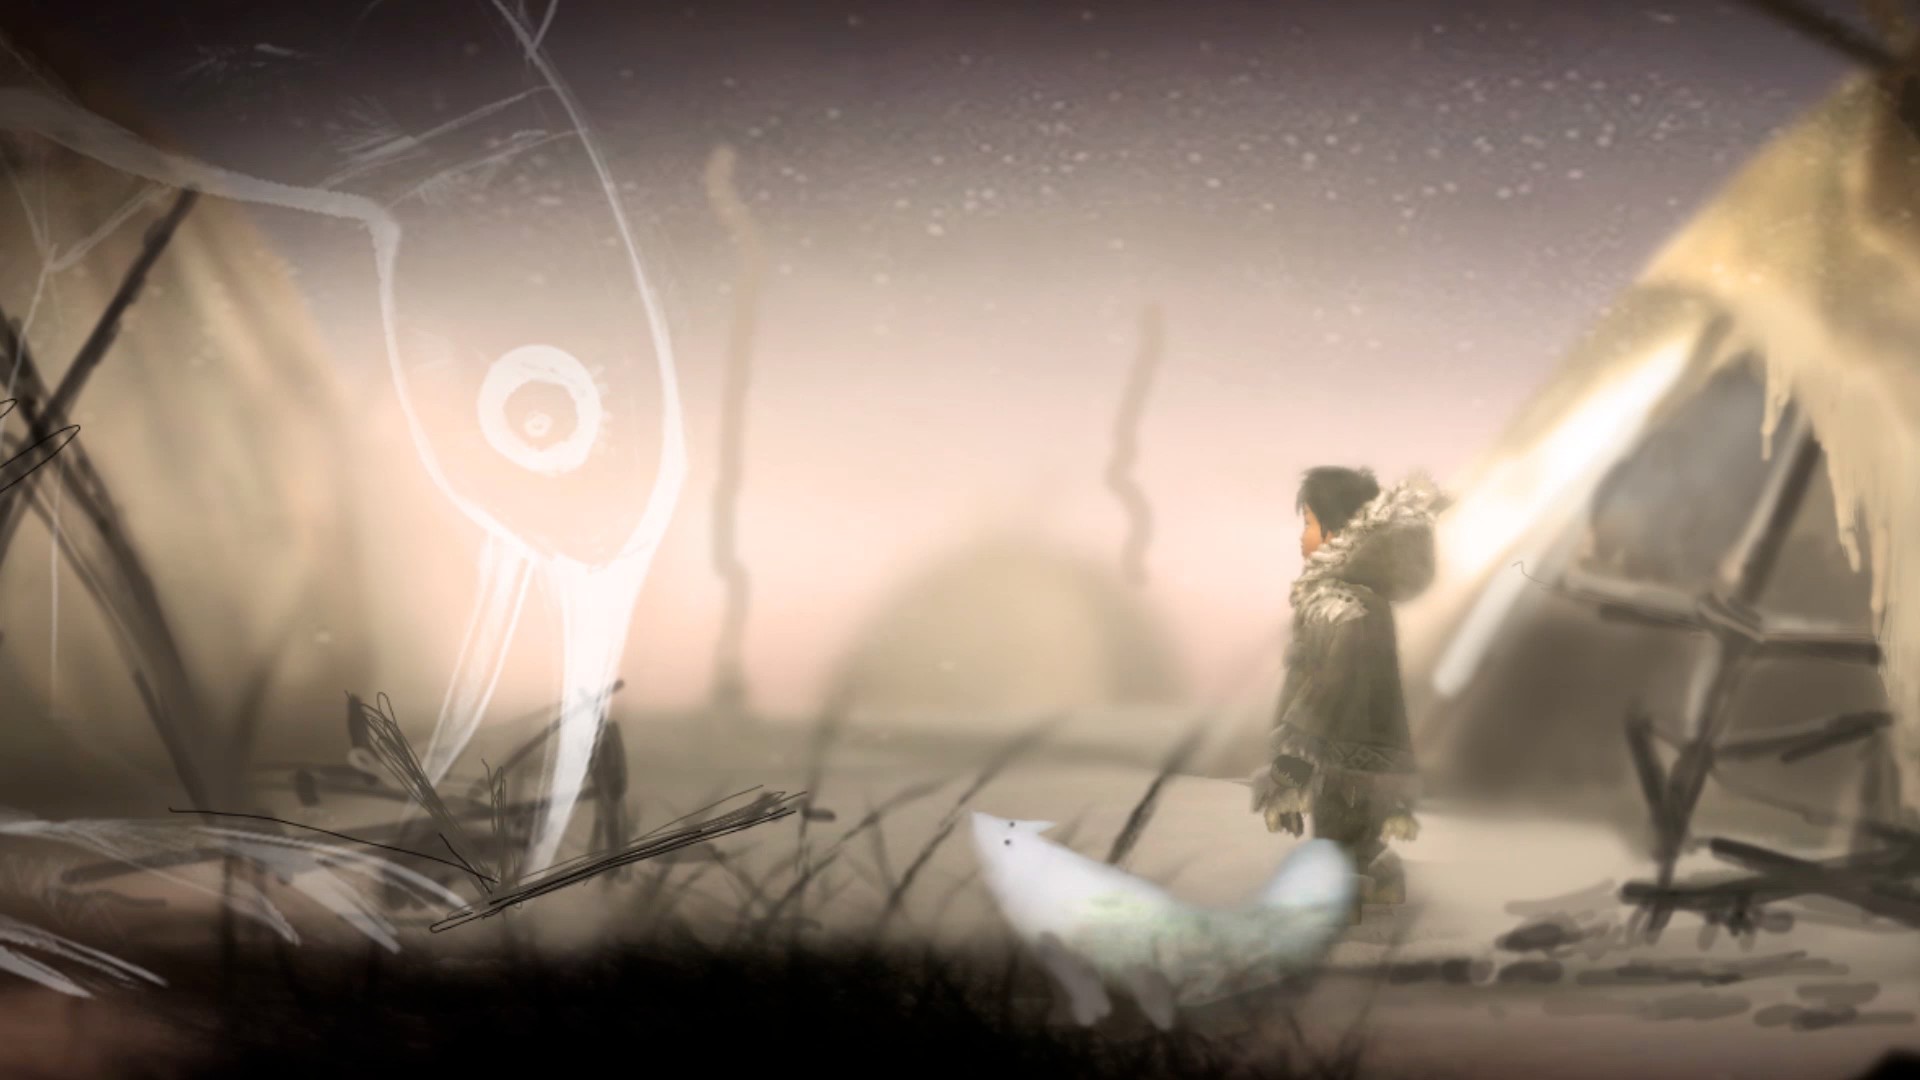 Never Alone is a game that improves players' focus